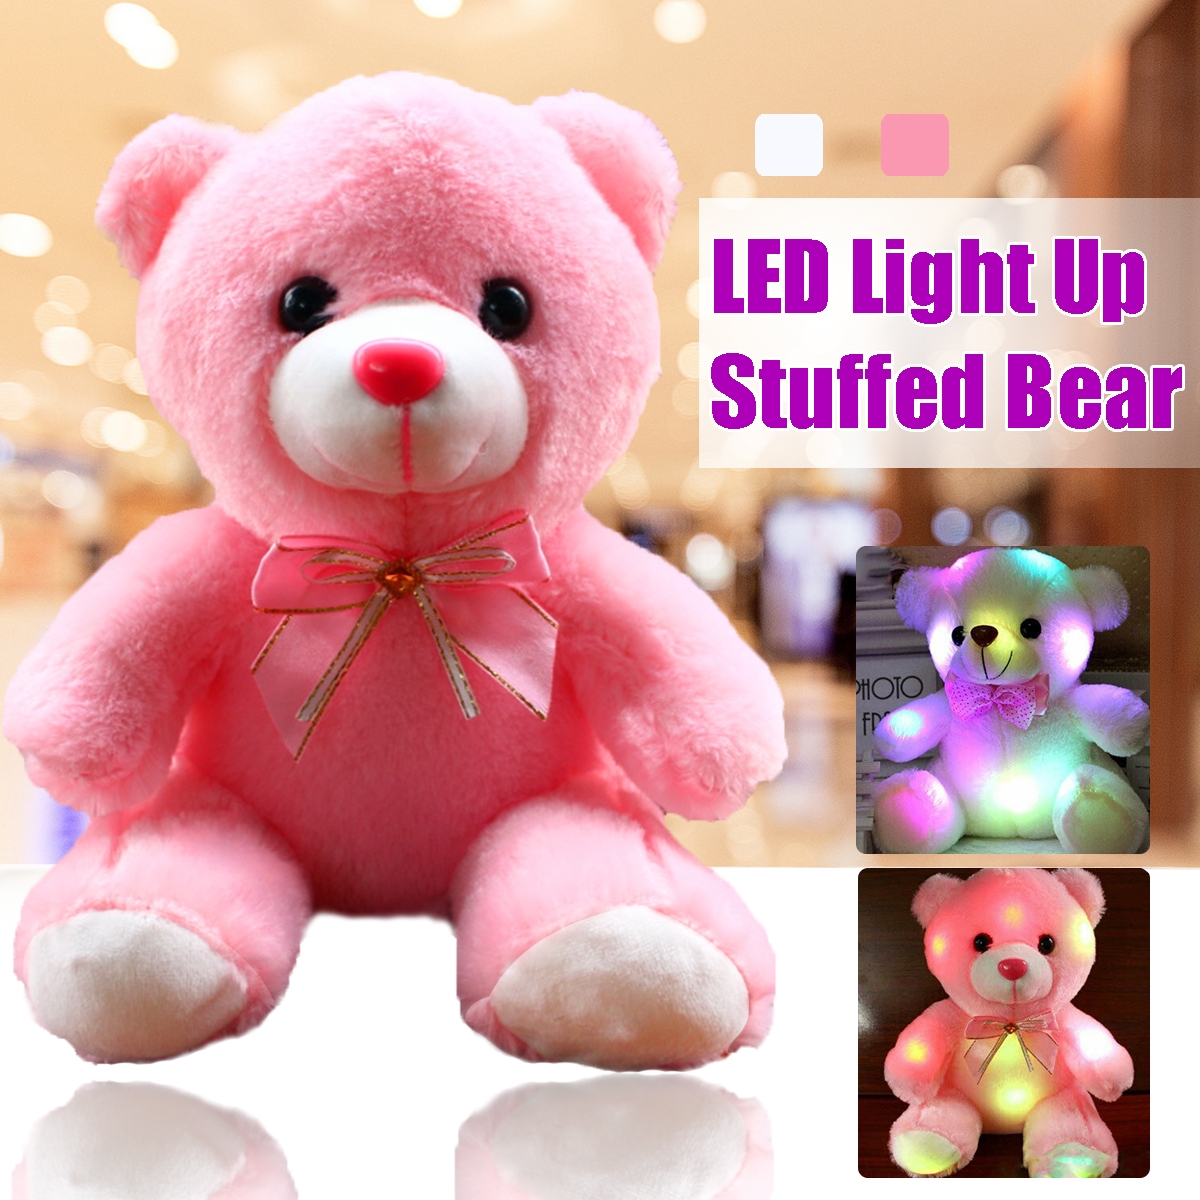 Girls Baby Cute Soft Stuffed Plush Teddy Bear Toy with LED Light Up for Kids Xmas Gift